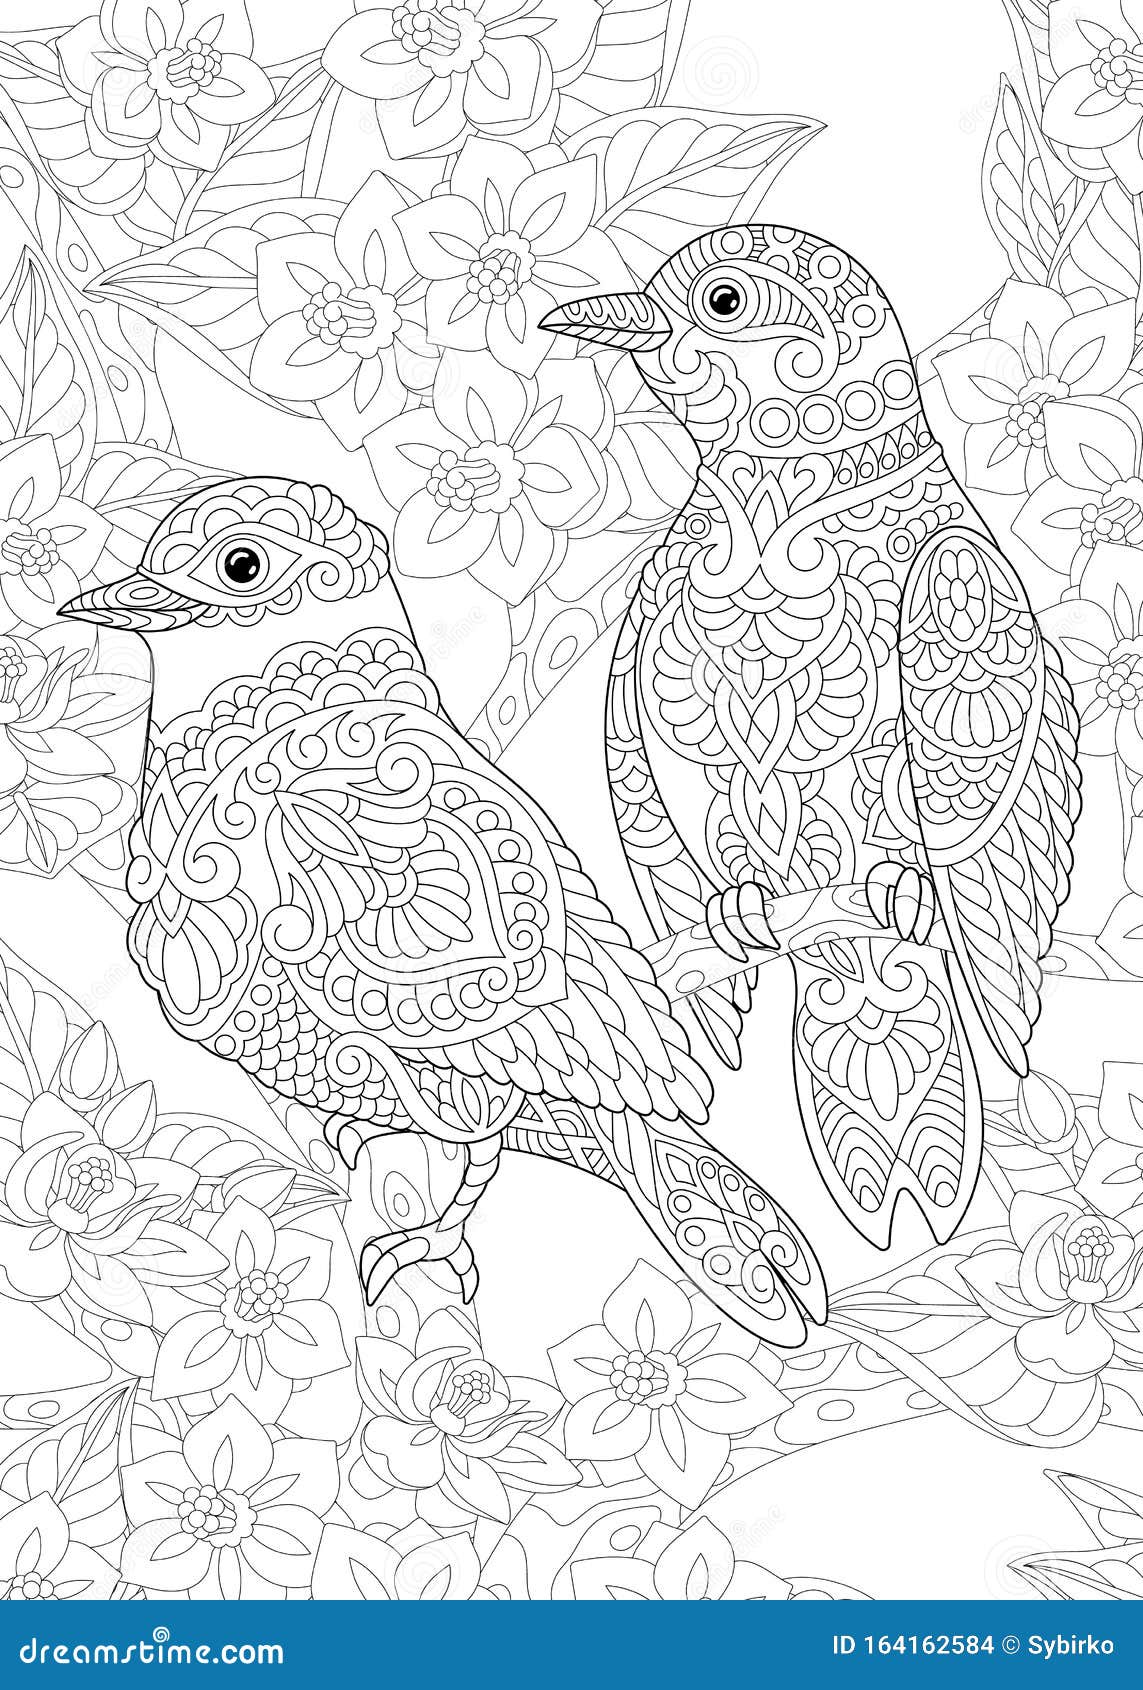 Coloring Page with Bird in the Garden Stock Vector   Illustration ...